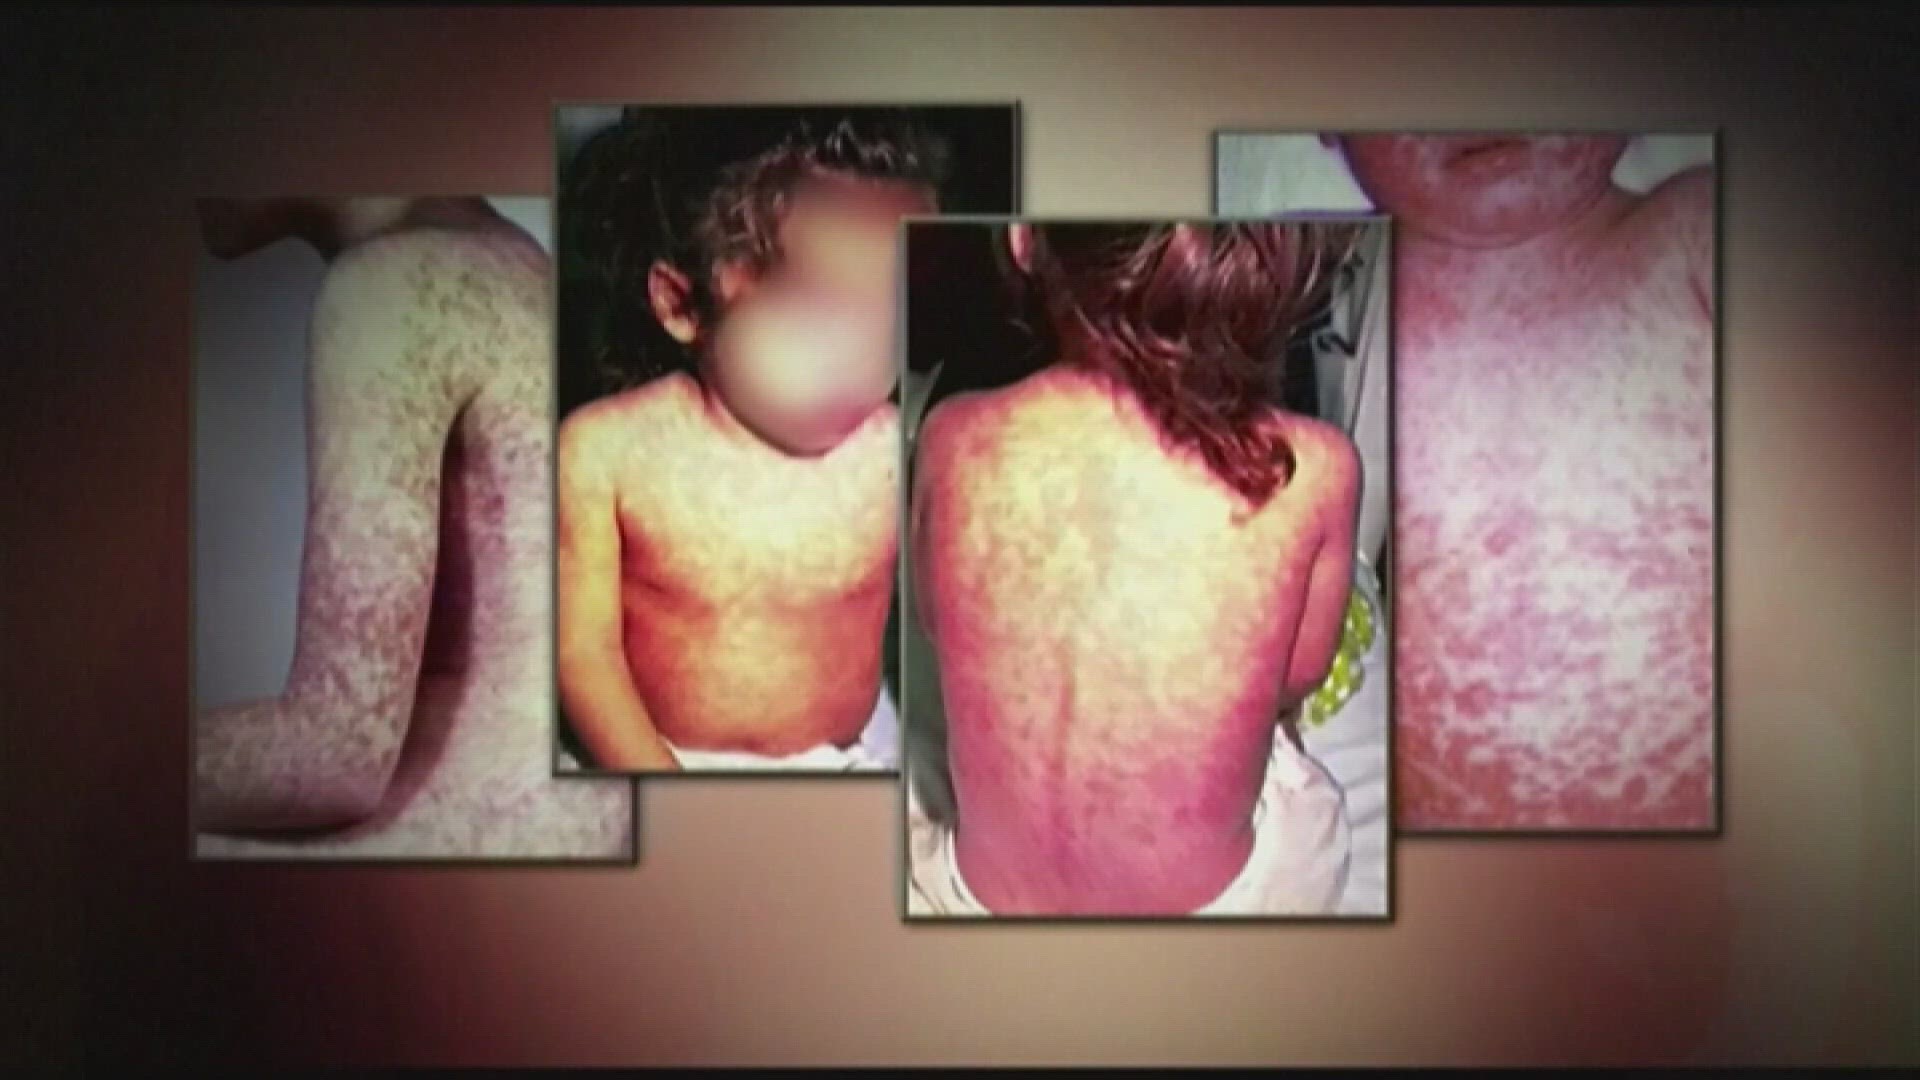 A visitor to Maricopa County from overseas has tested positive for measles and that news has health officials concerned as measles can be highly contagious.